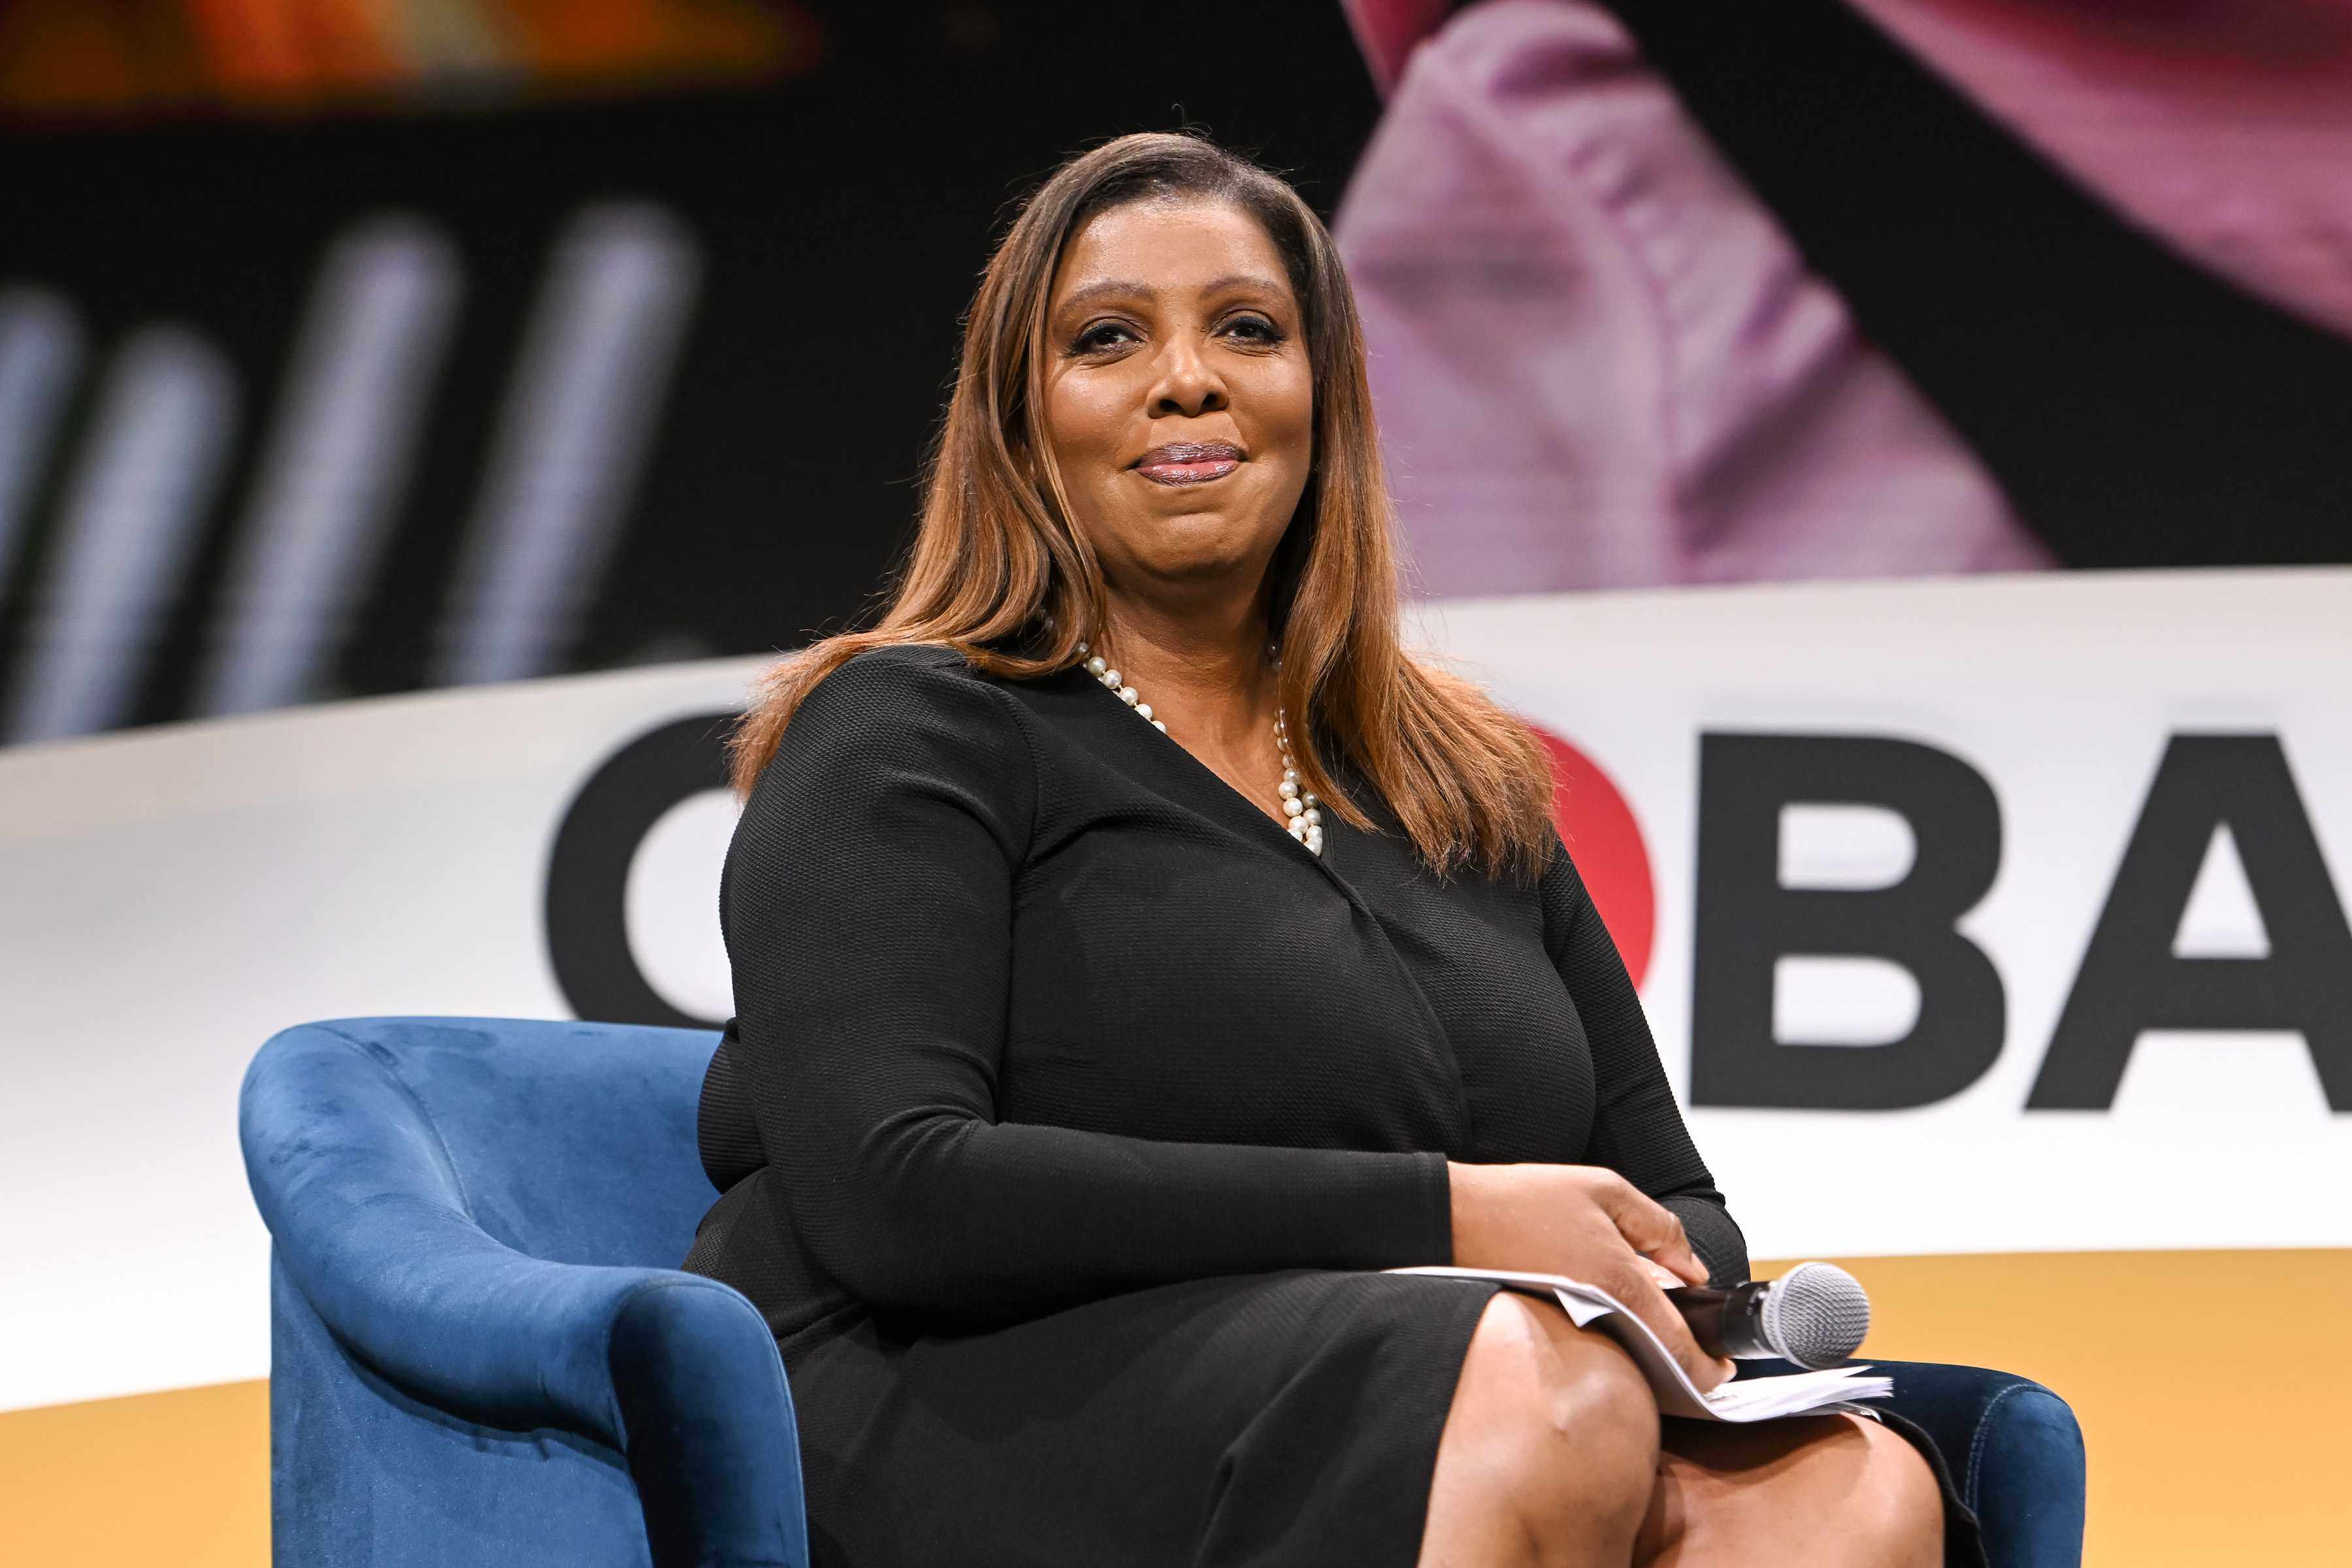 Attorney general of New York Letitia James speaks at the Global Citizen Now summit at The Glasshouse in April 2023, in New York City. Photo: Getty Images for Global Citizen